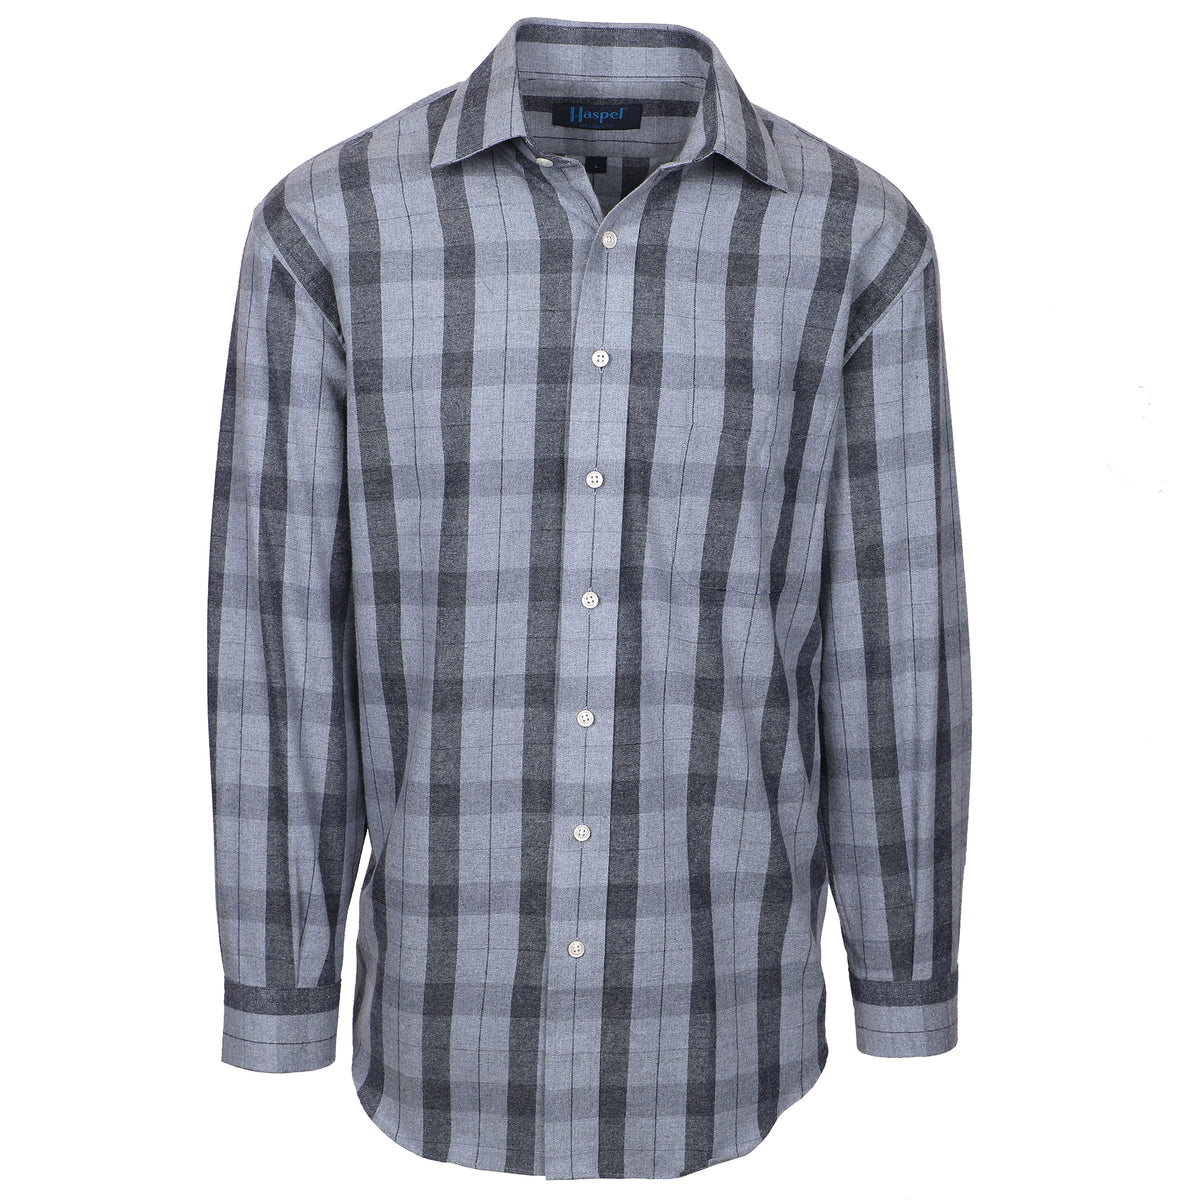 Denim toned plaid and ready to go. Lightweight brushed cotton for style and comfort.  100% Cotton • Long Sleeve • Spread Collar • Chest Pocket • Classic Fit 